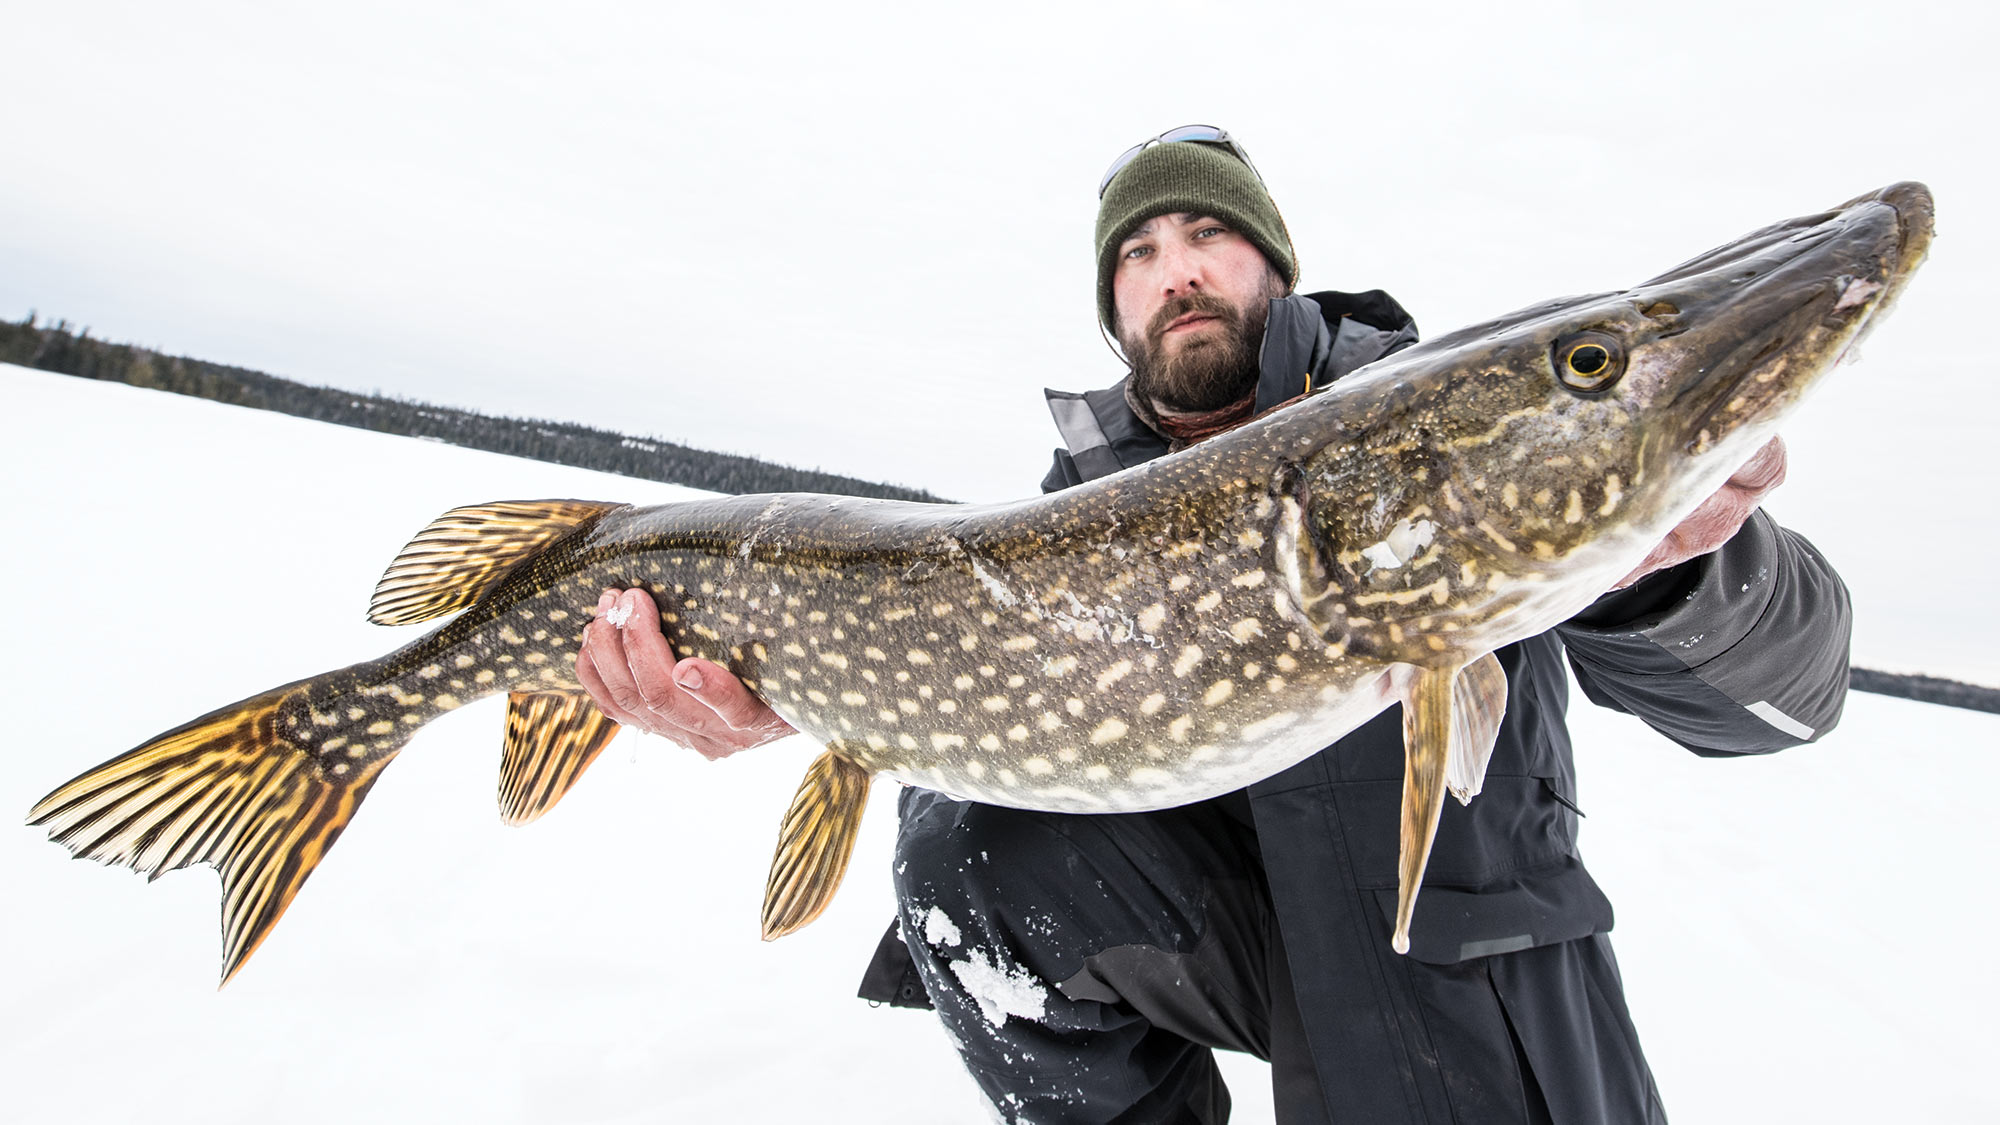 The Wilderness War: Ice Fishing the Boundary Waters Canoe Area